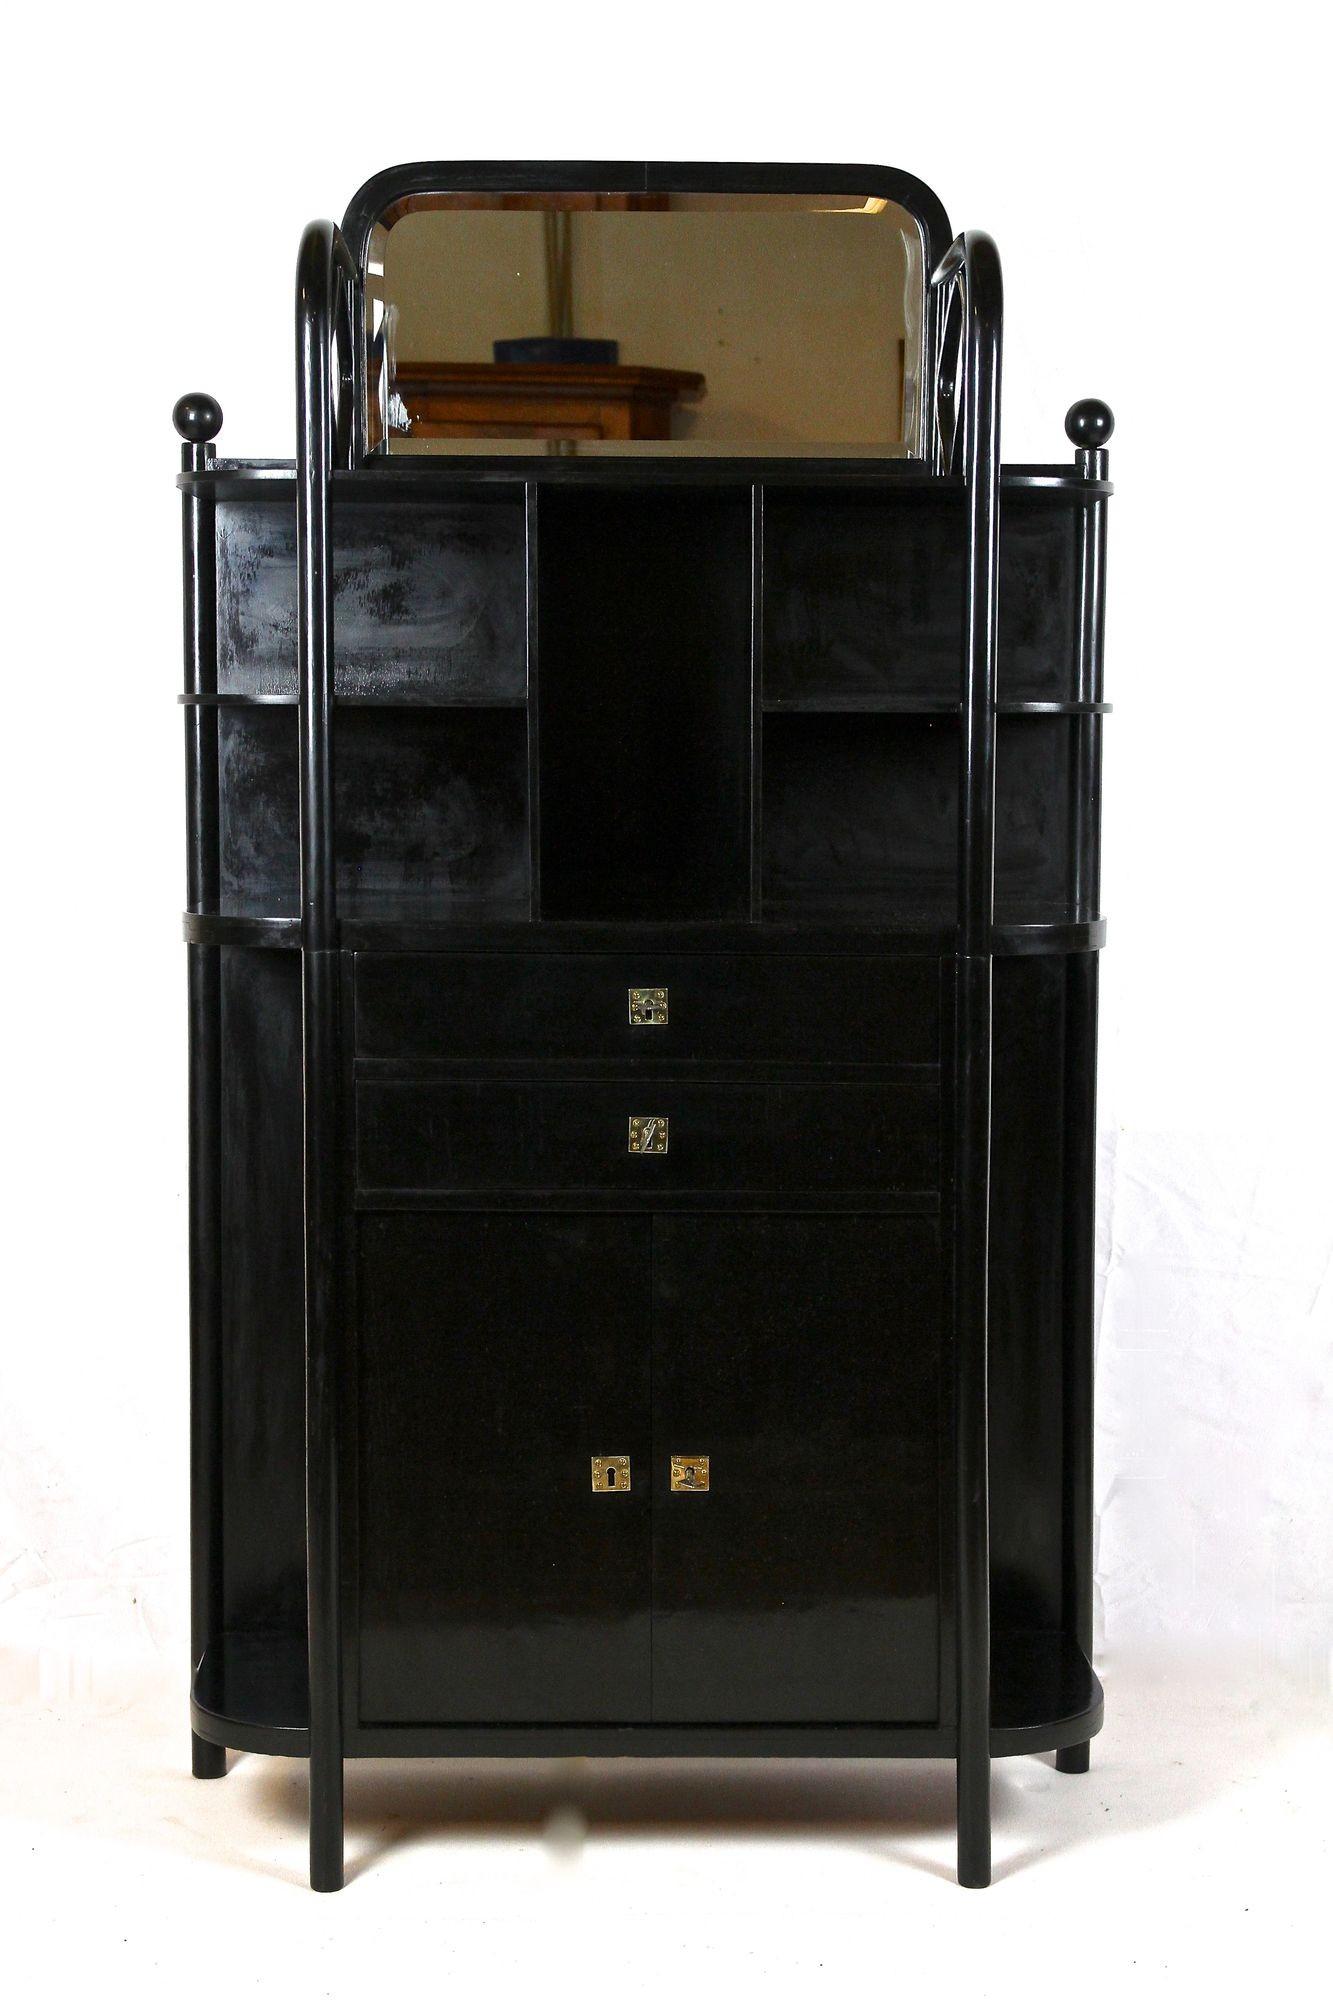 Another rarity in our highly demanded Art Nouveau furniture collection: an absolute fantastic, unusual black display cabinet from the early period around 1905, designed by none other than the world famous Austrian architect Josef Hoffmann (1870 -